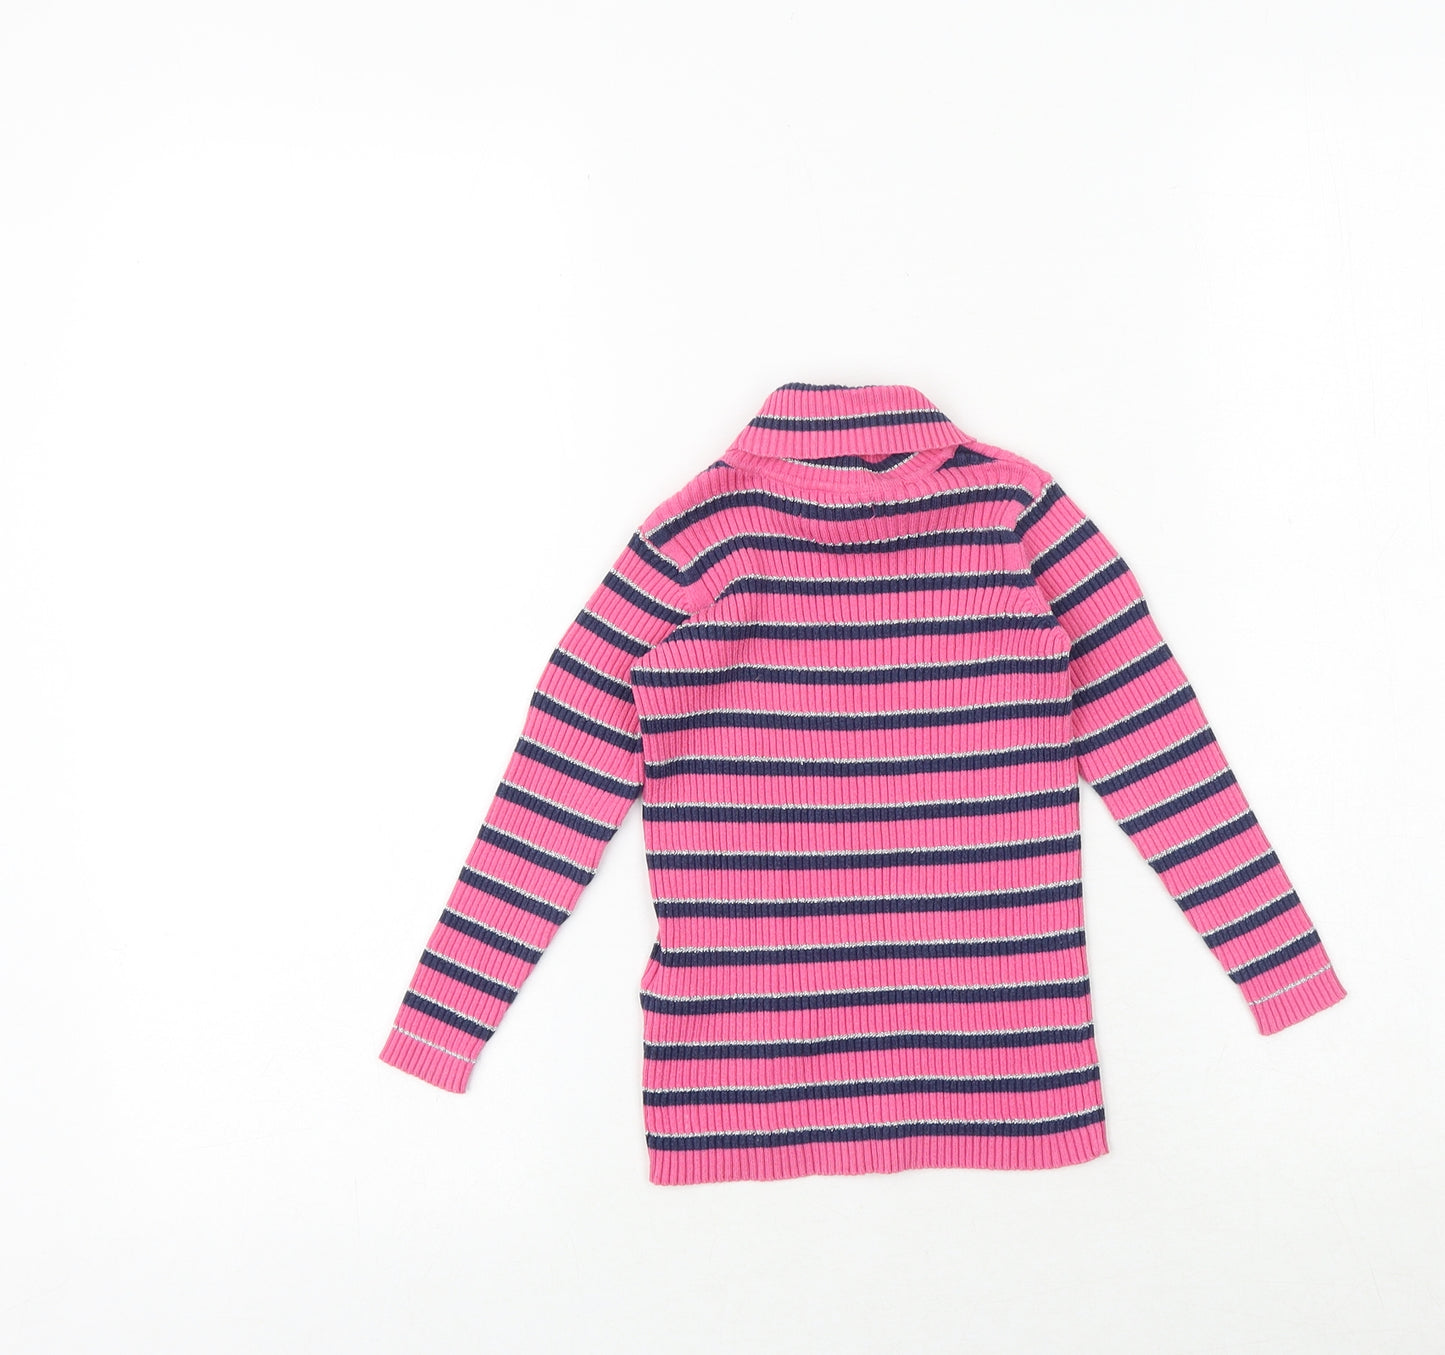 Debenhams Girls Pink Roll Neck Striped Cotton Pullover Jumper Size 2-3 Years Pullover